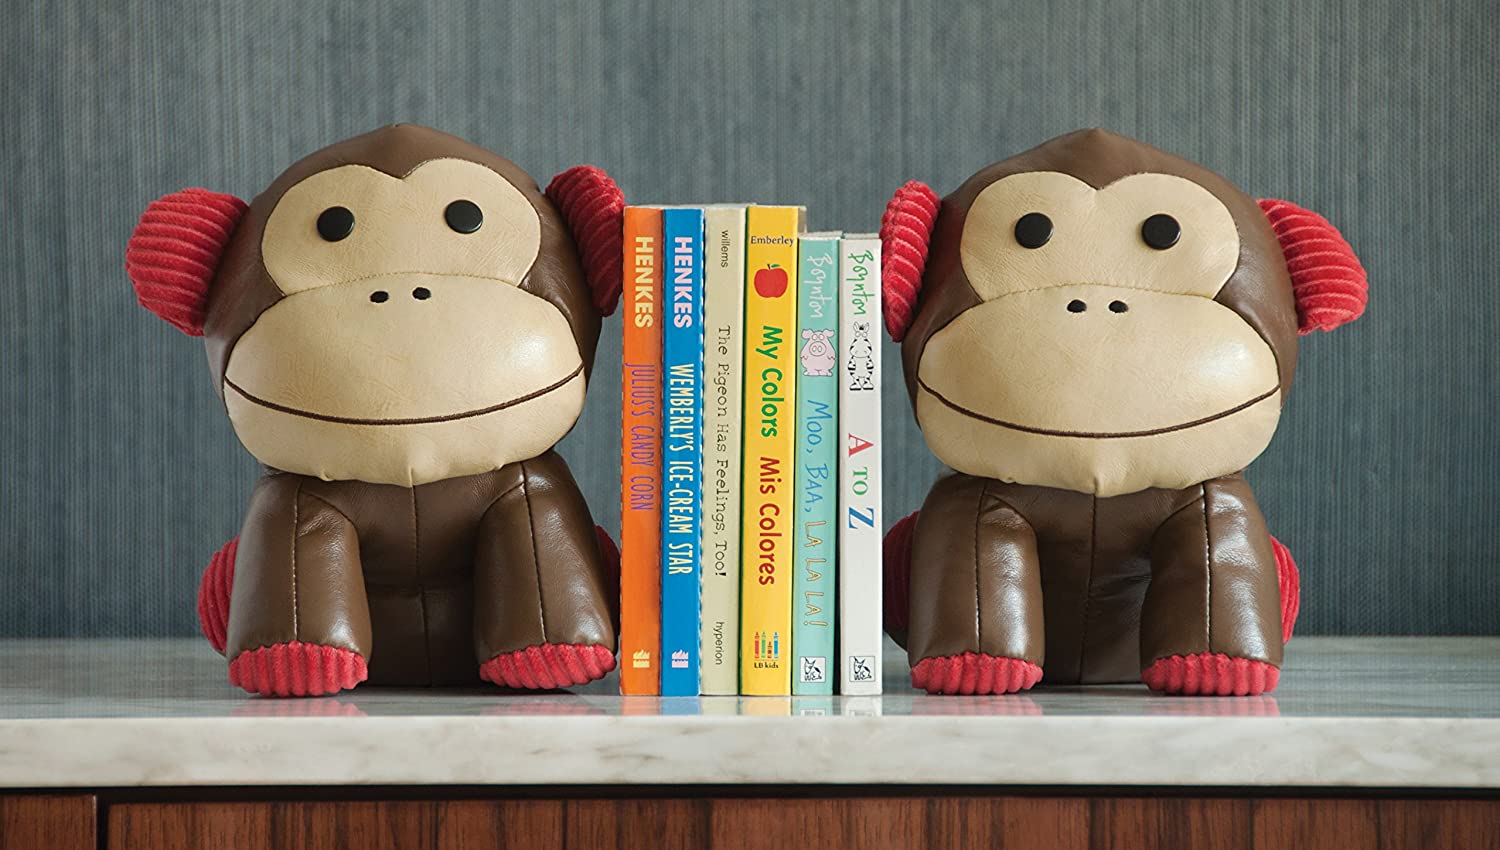 SKIP HOP Zoo Bookends - Monkey - ANB Baby -baby activity center